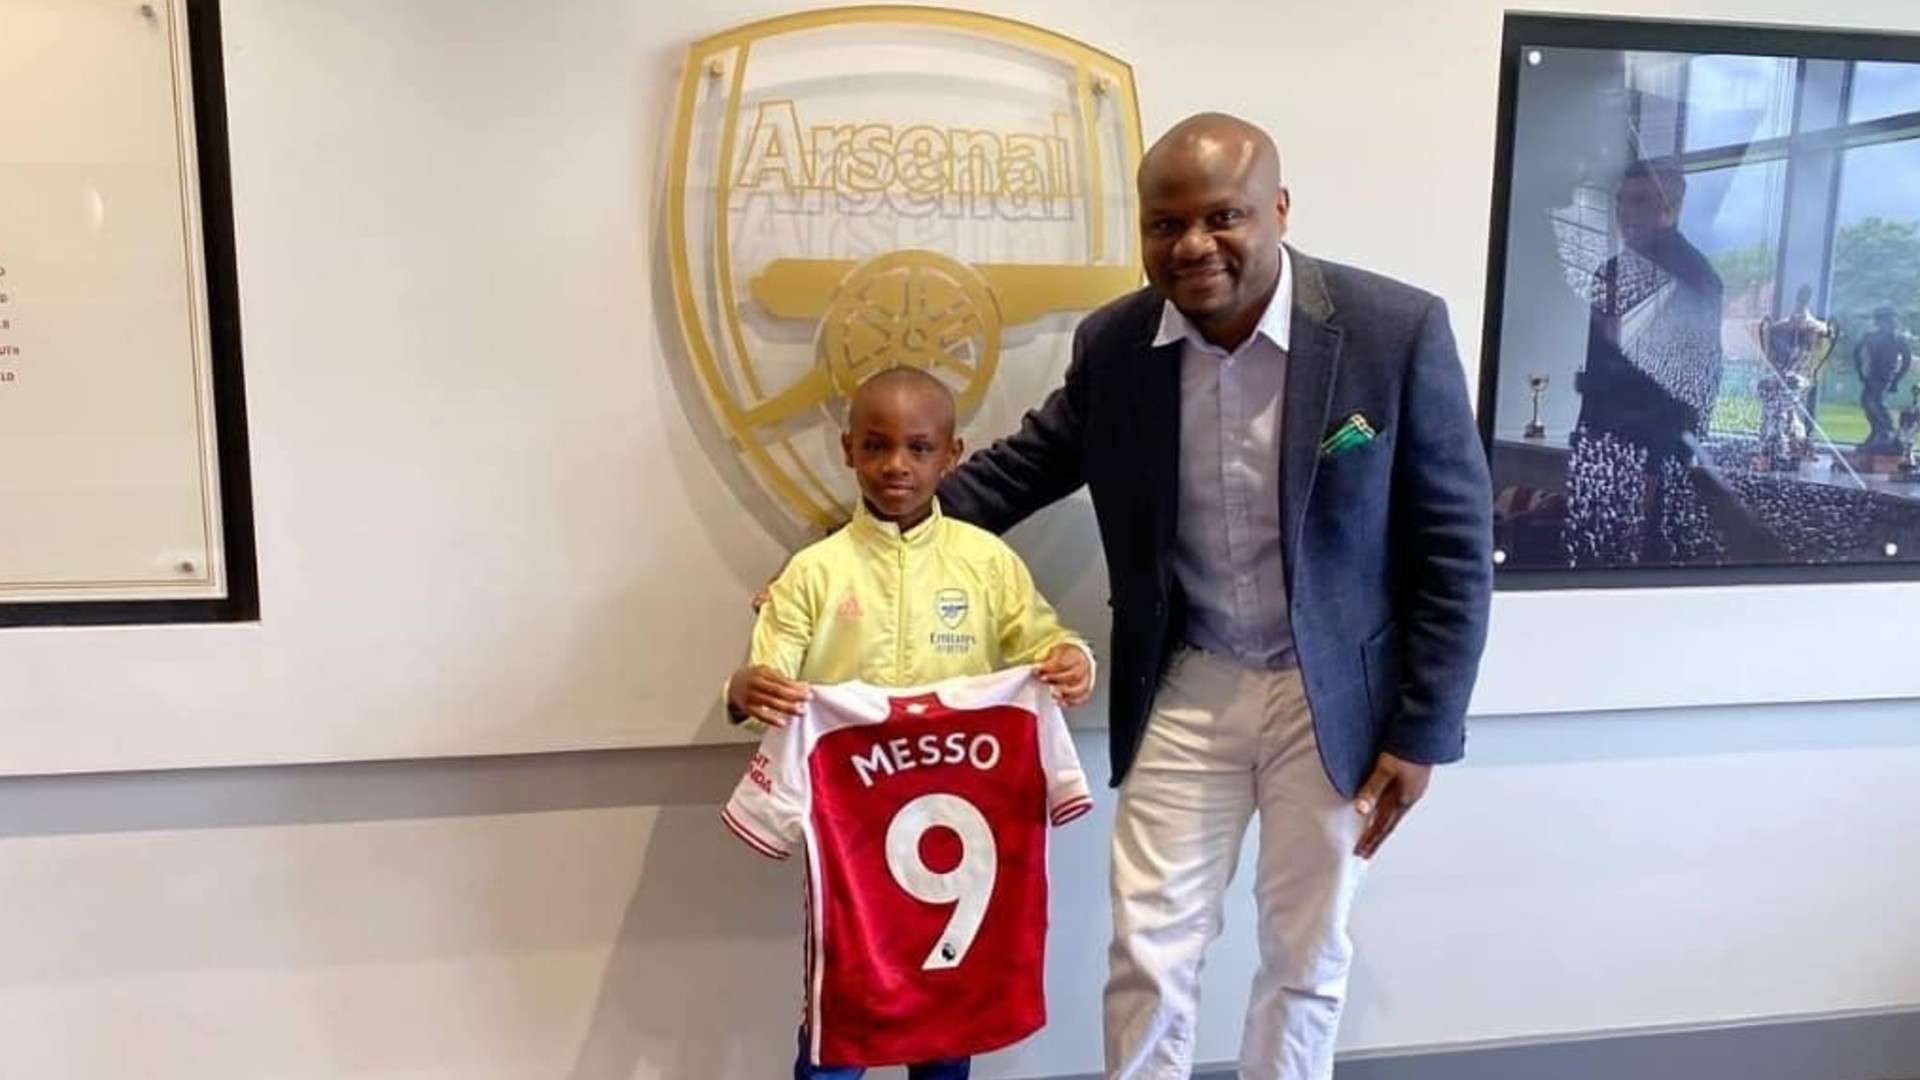 Leo Messo of Arsenal and dad Benson Messo.